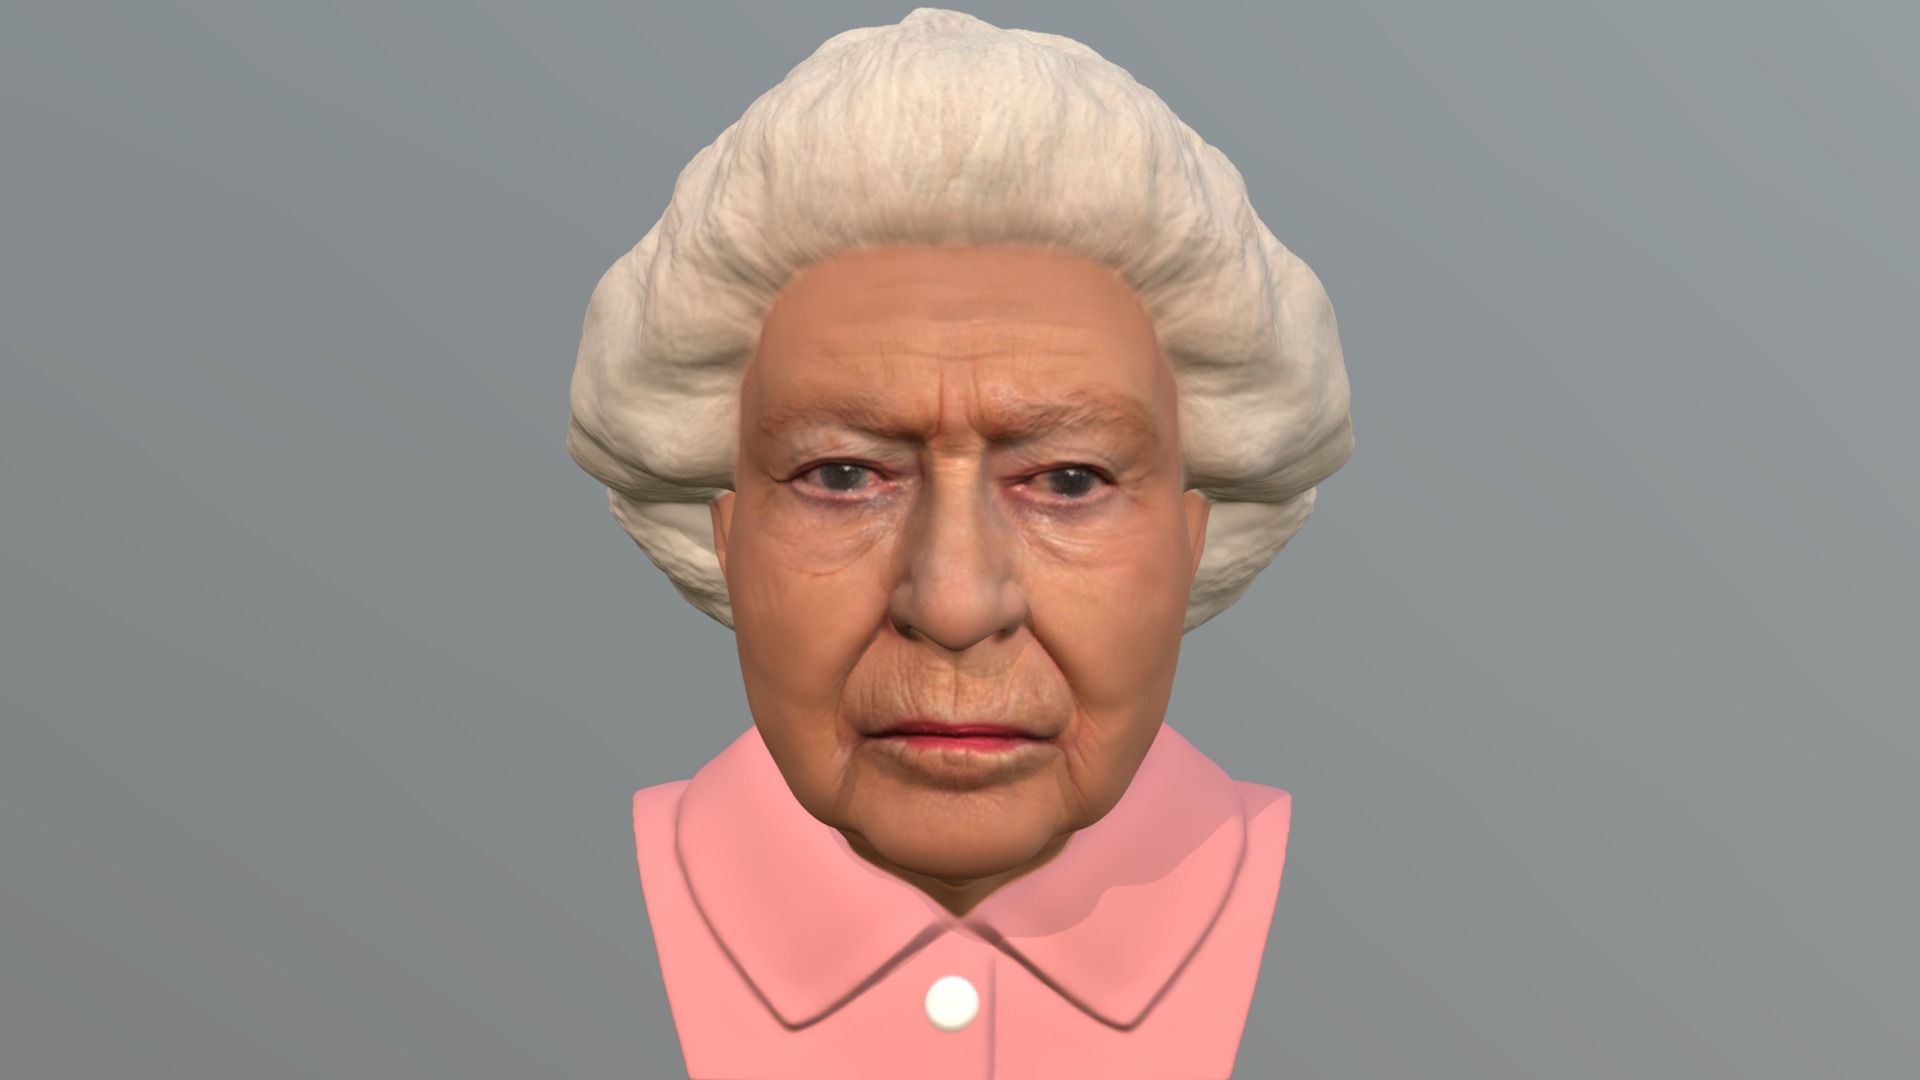 3D model Queen Elizabeth bust full color 3D printing - This is a 3D model of the Queen Elizabeth bust full color 3D printing. The 3D model is about a man with a white head covering.